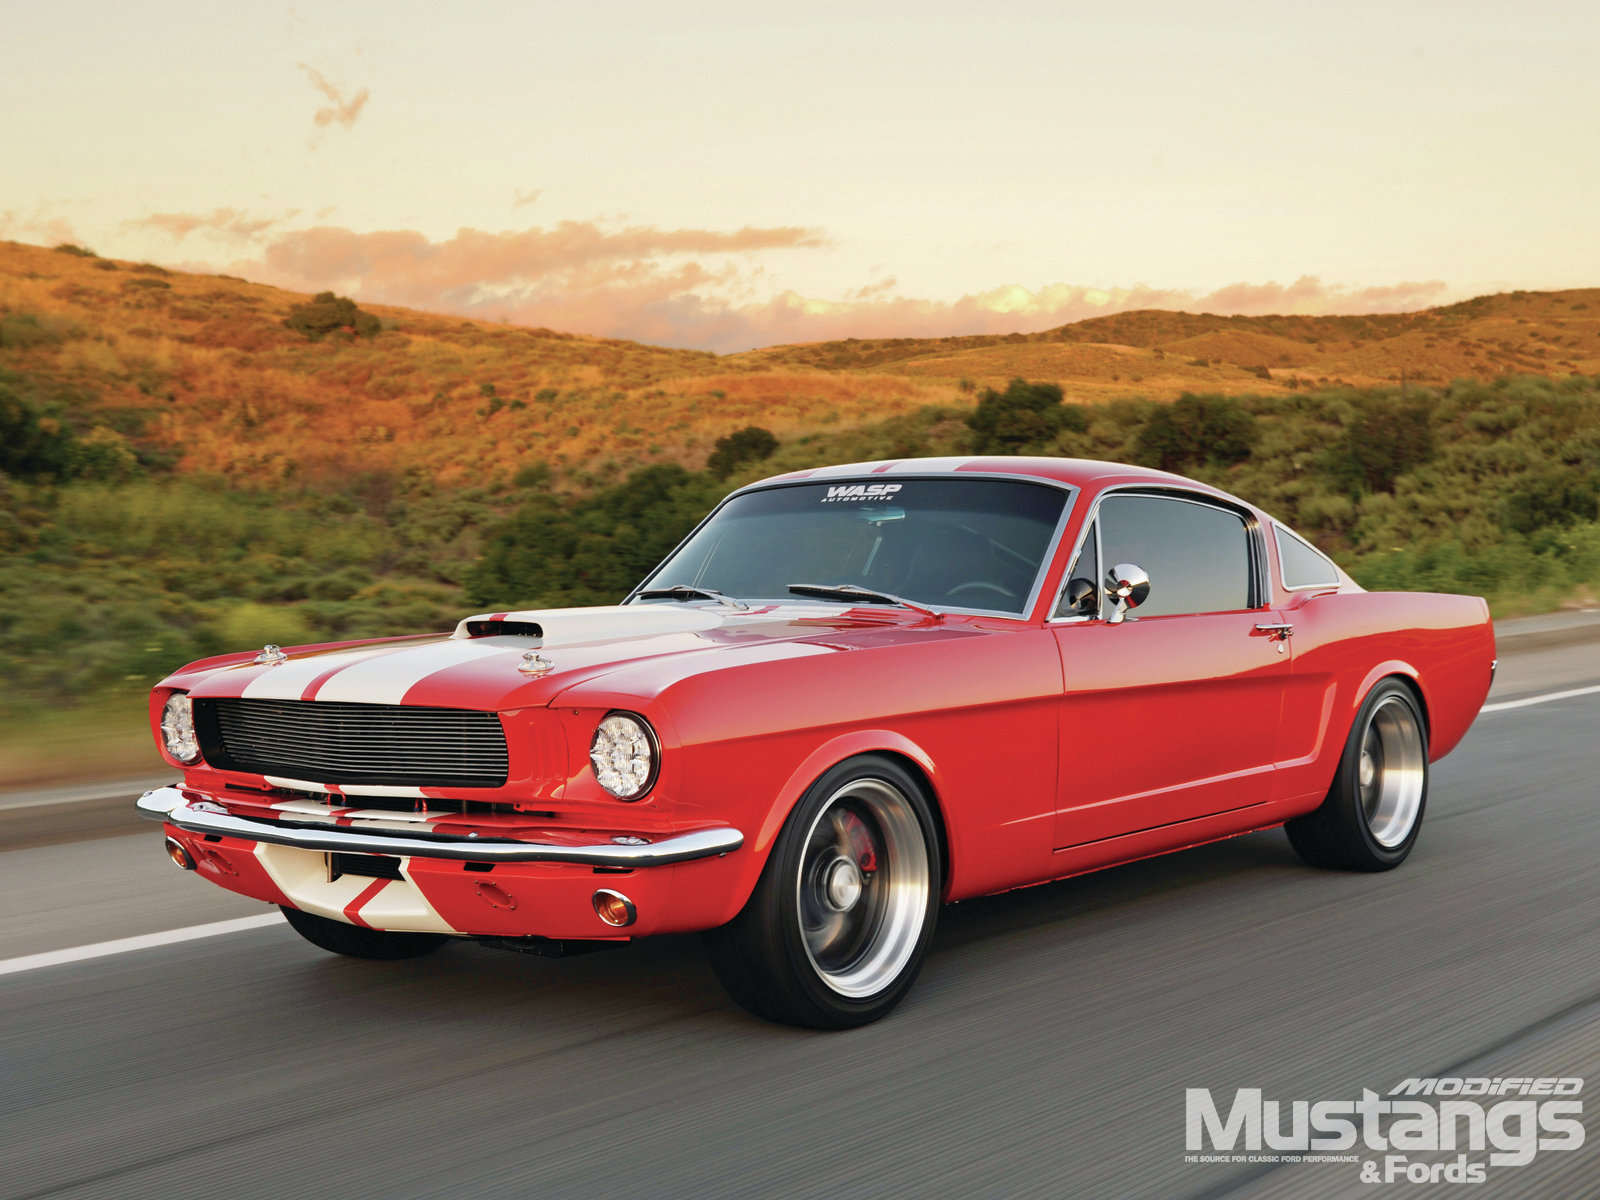 Amazing Ford Mustang Fastback Pictures & Backgrounds